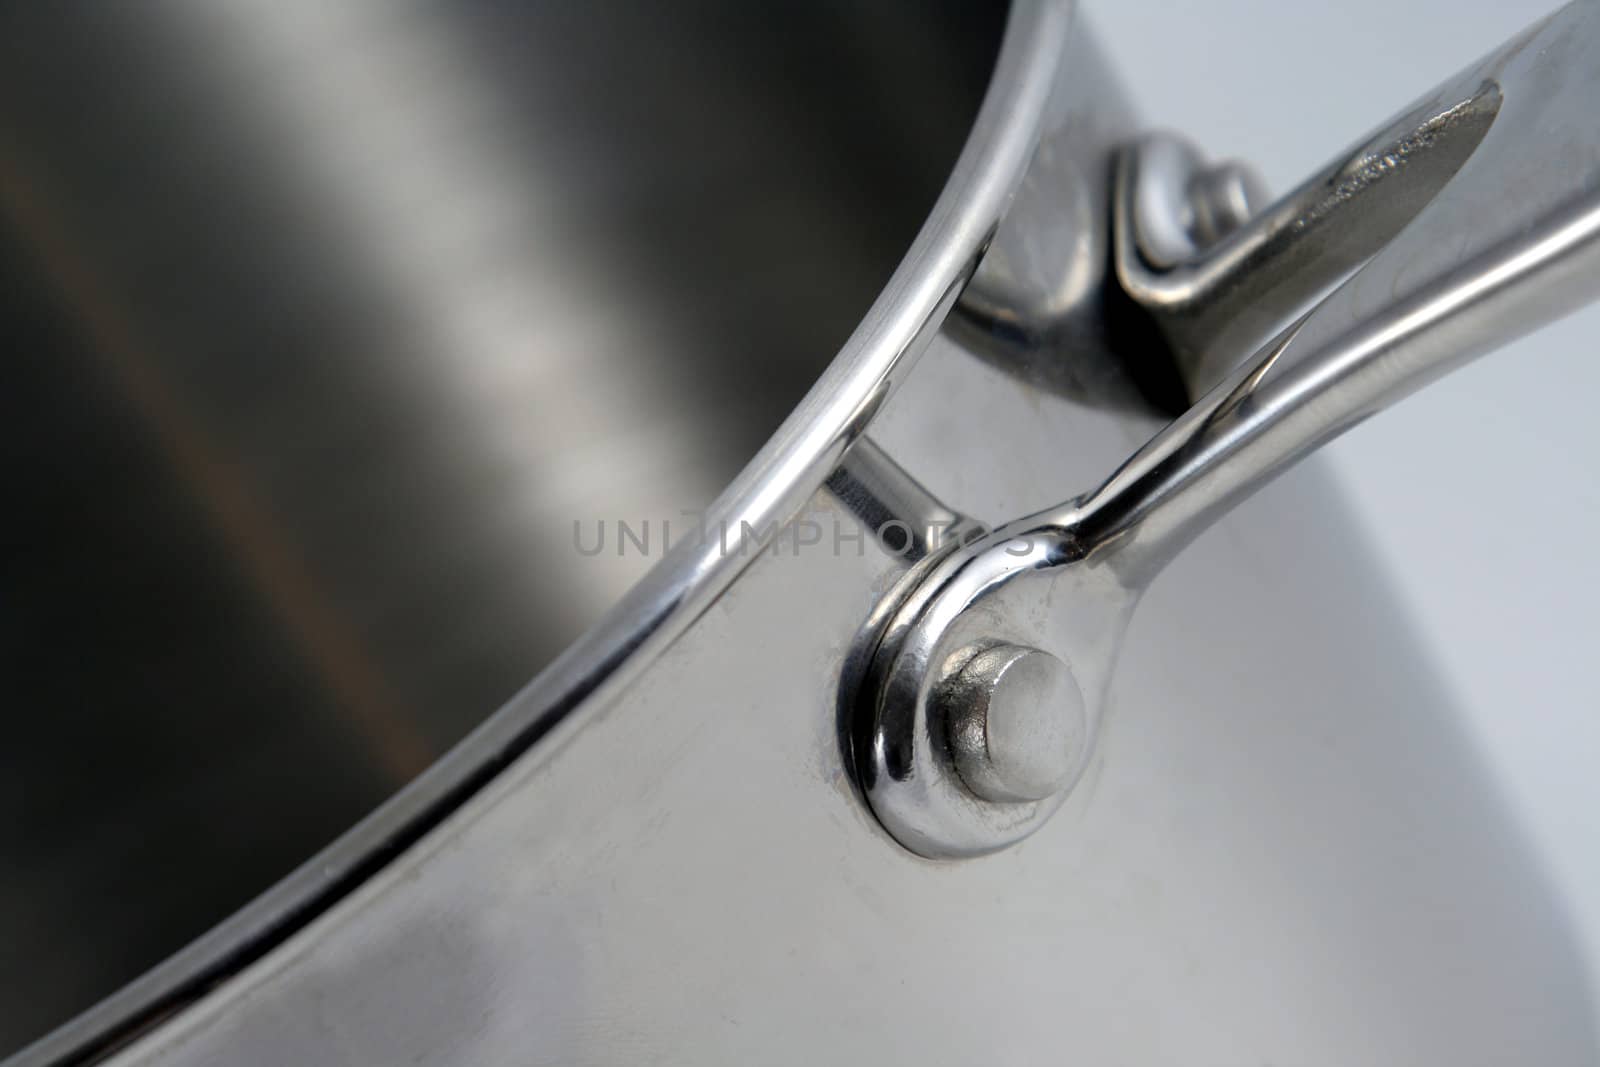 Stainless Steel Pot Closeup
 by ca2hill